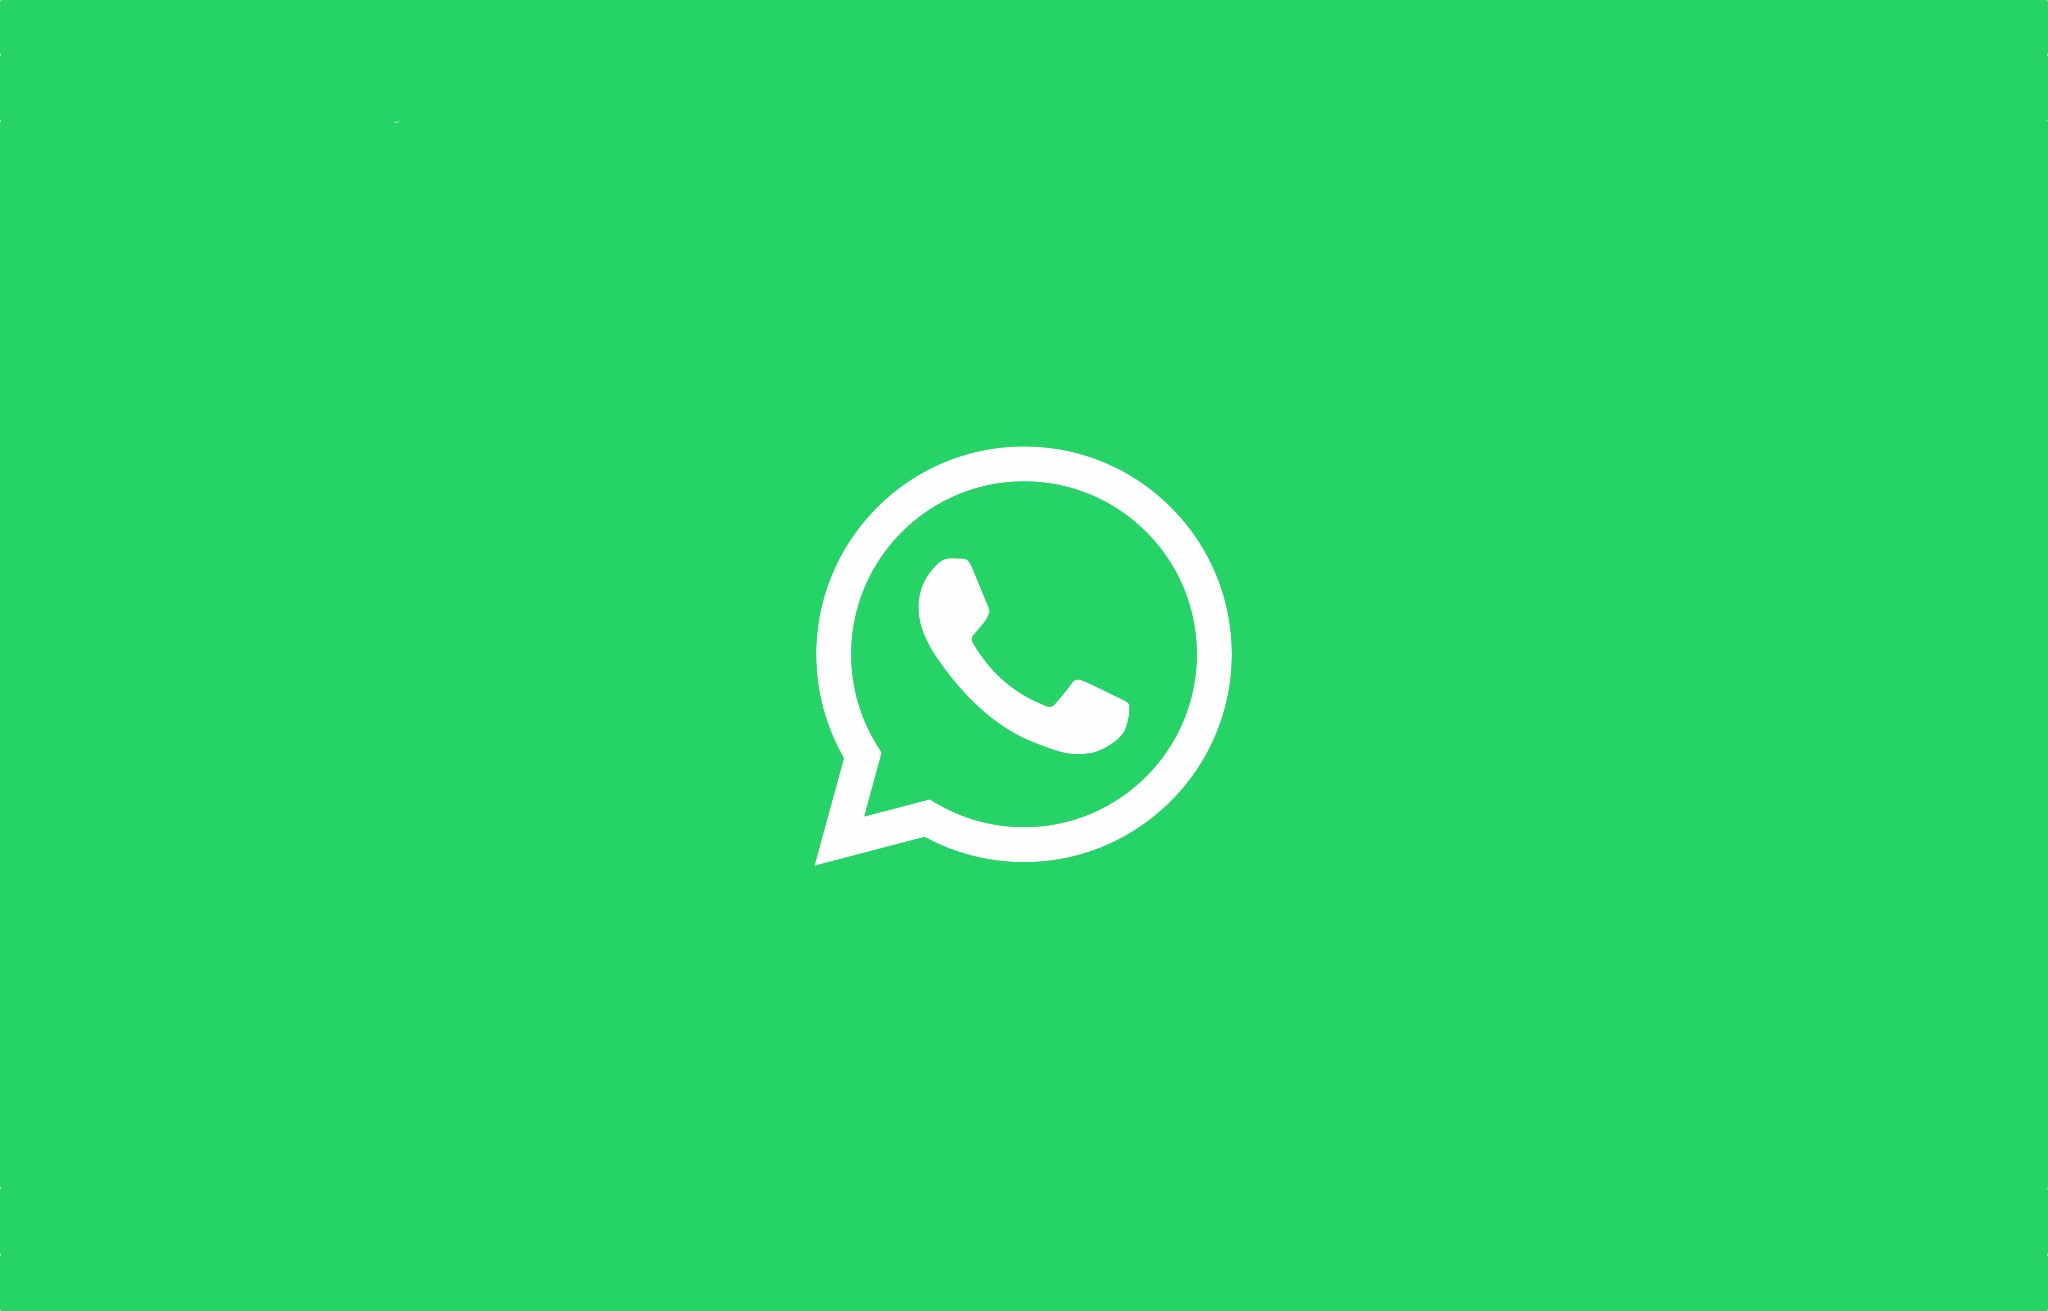 An illustration with a WhatsApp logo in white set against a green background